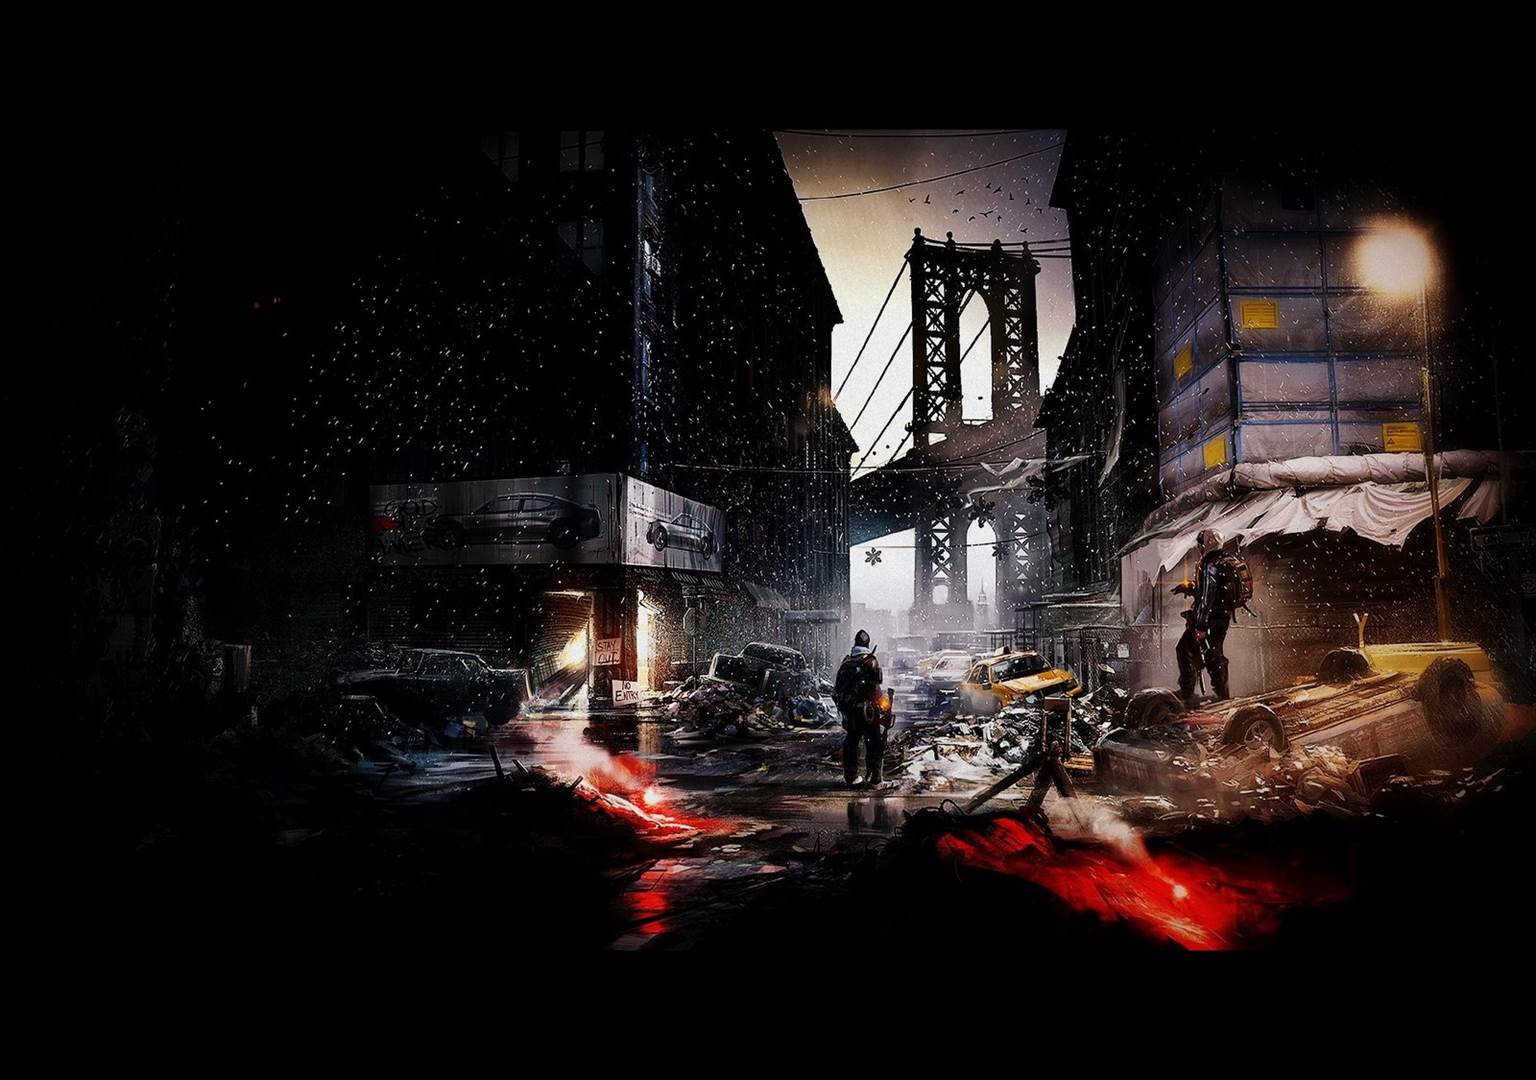 Tom Clancy's The Division Wallpaper in 1080P HD